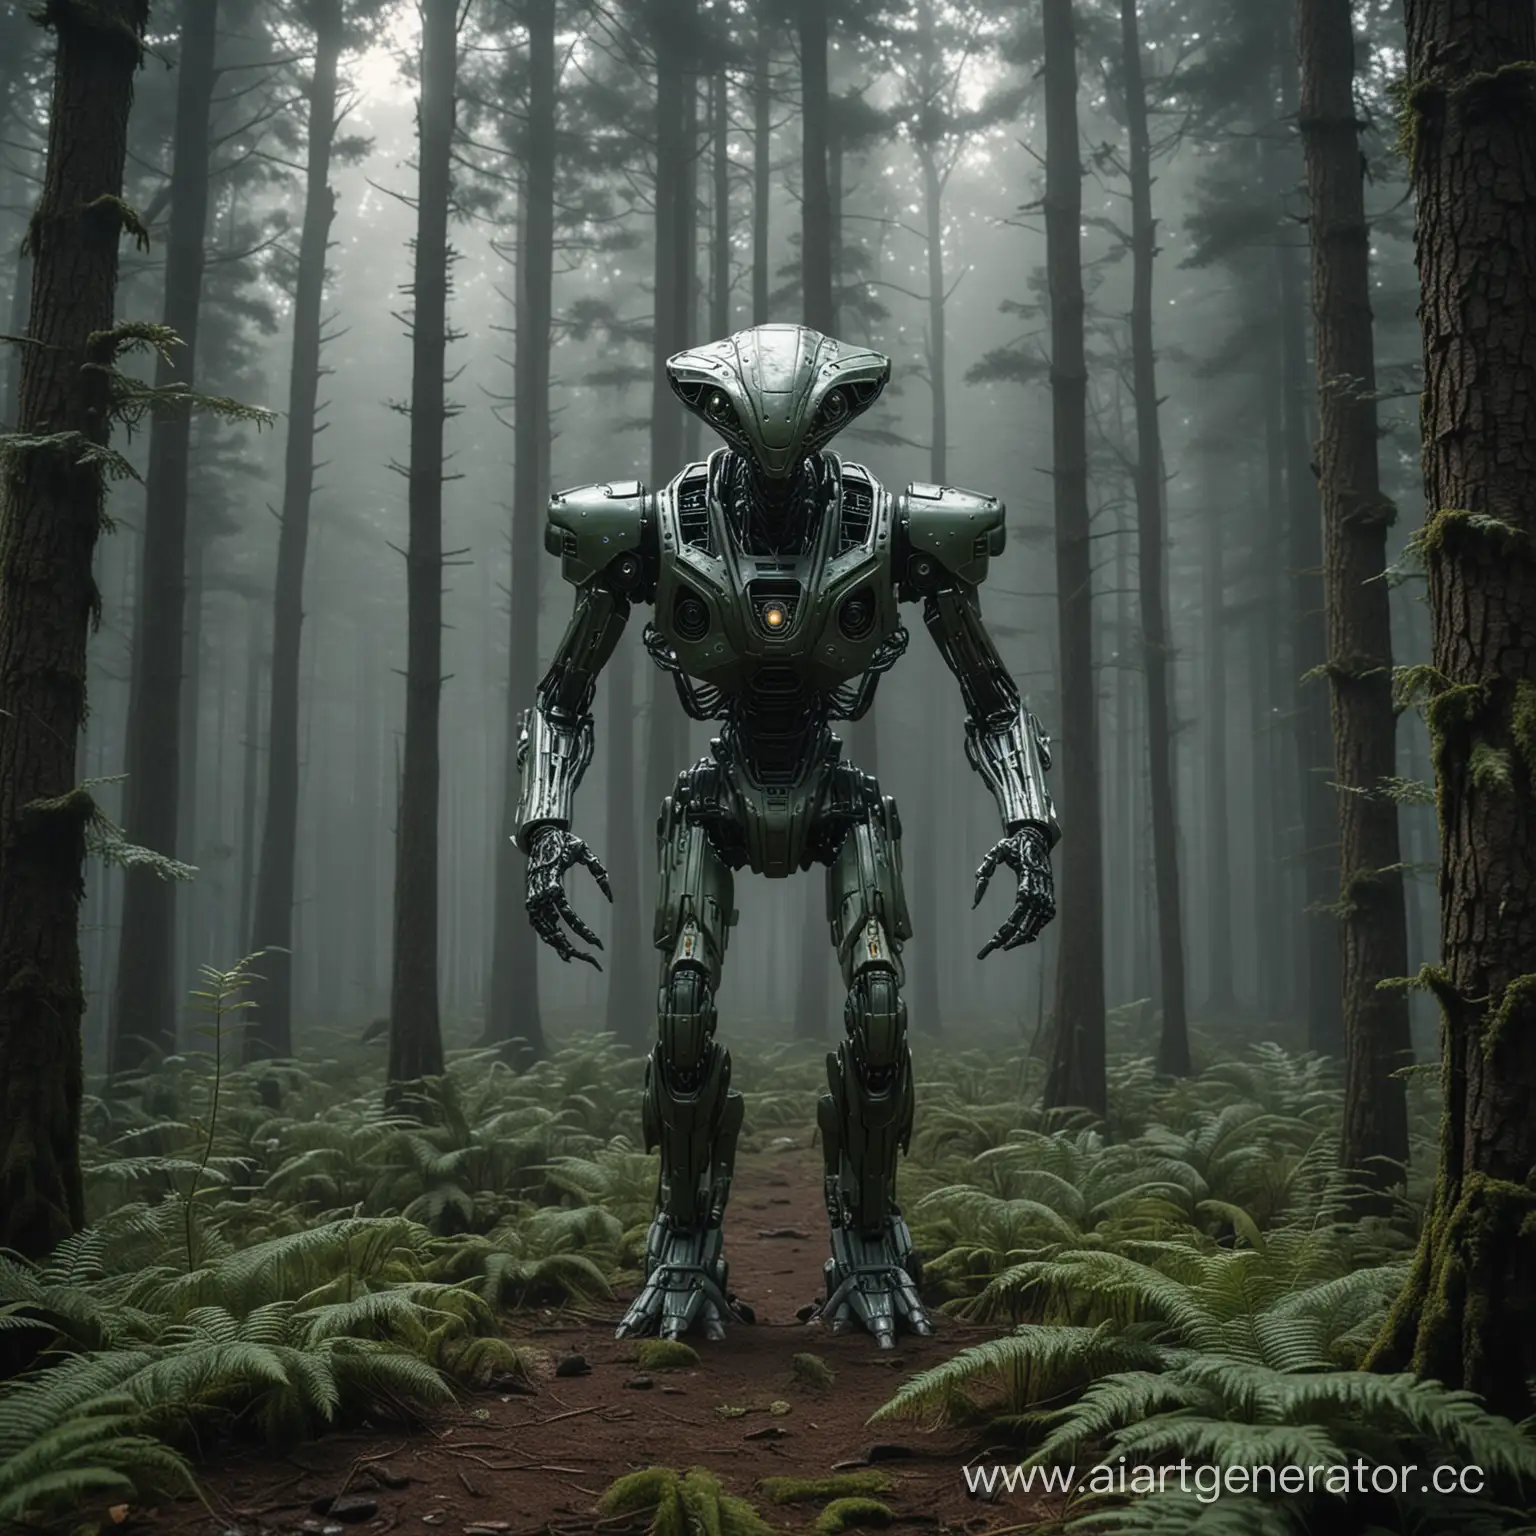 Alien-Robot-Emerges-from-UFO-in-Forest-Clearing